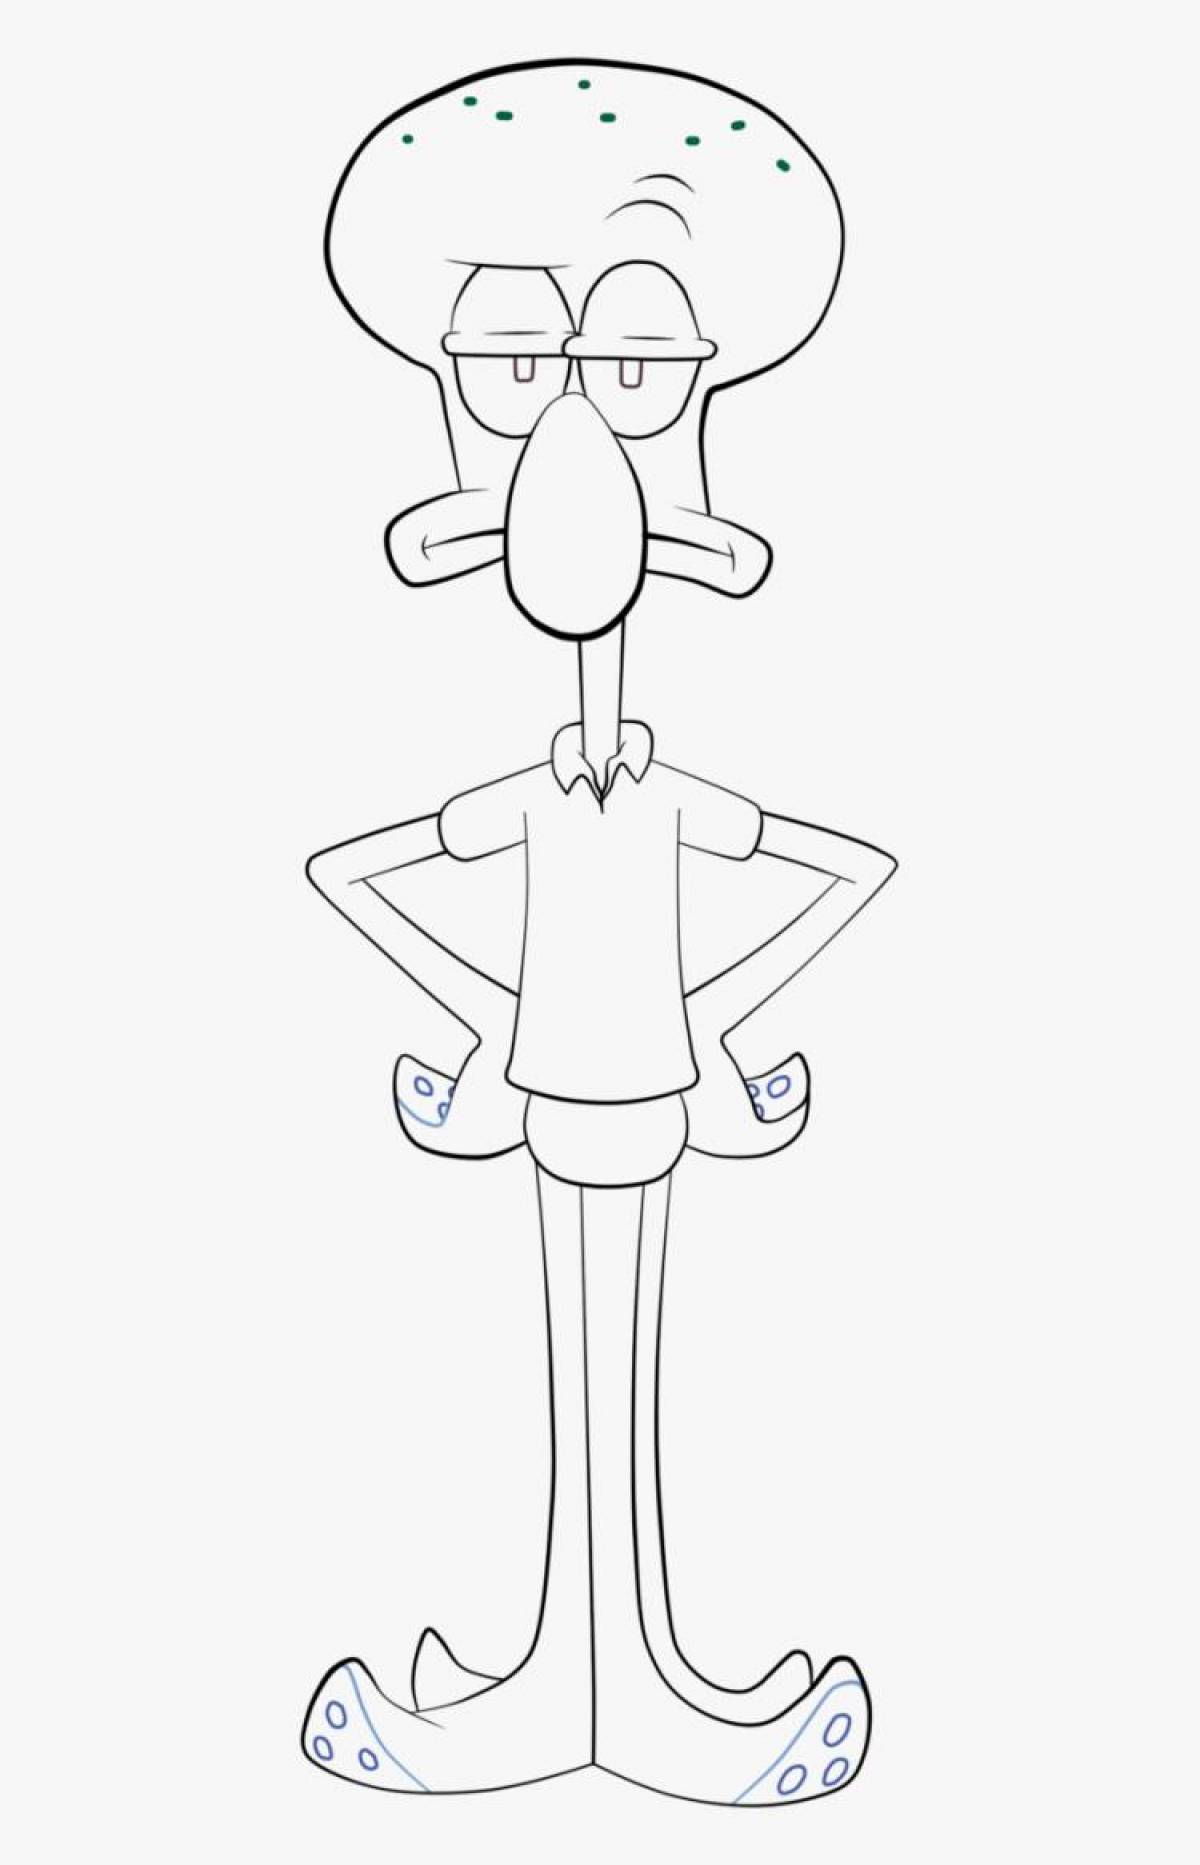 Squidward deluxe coloring book